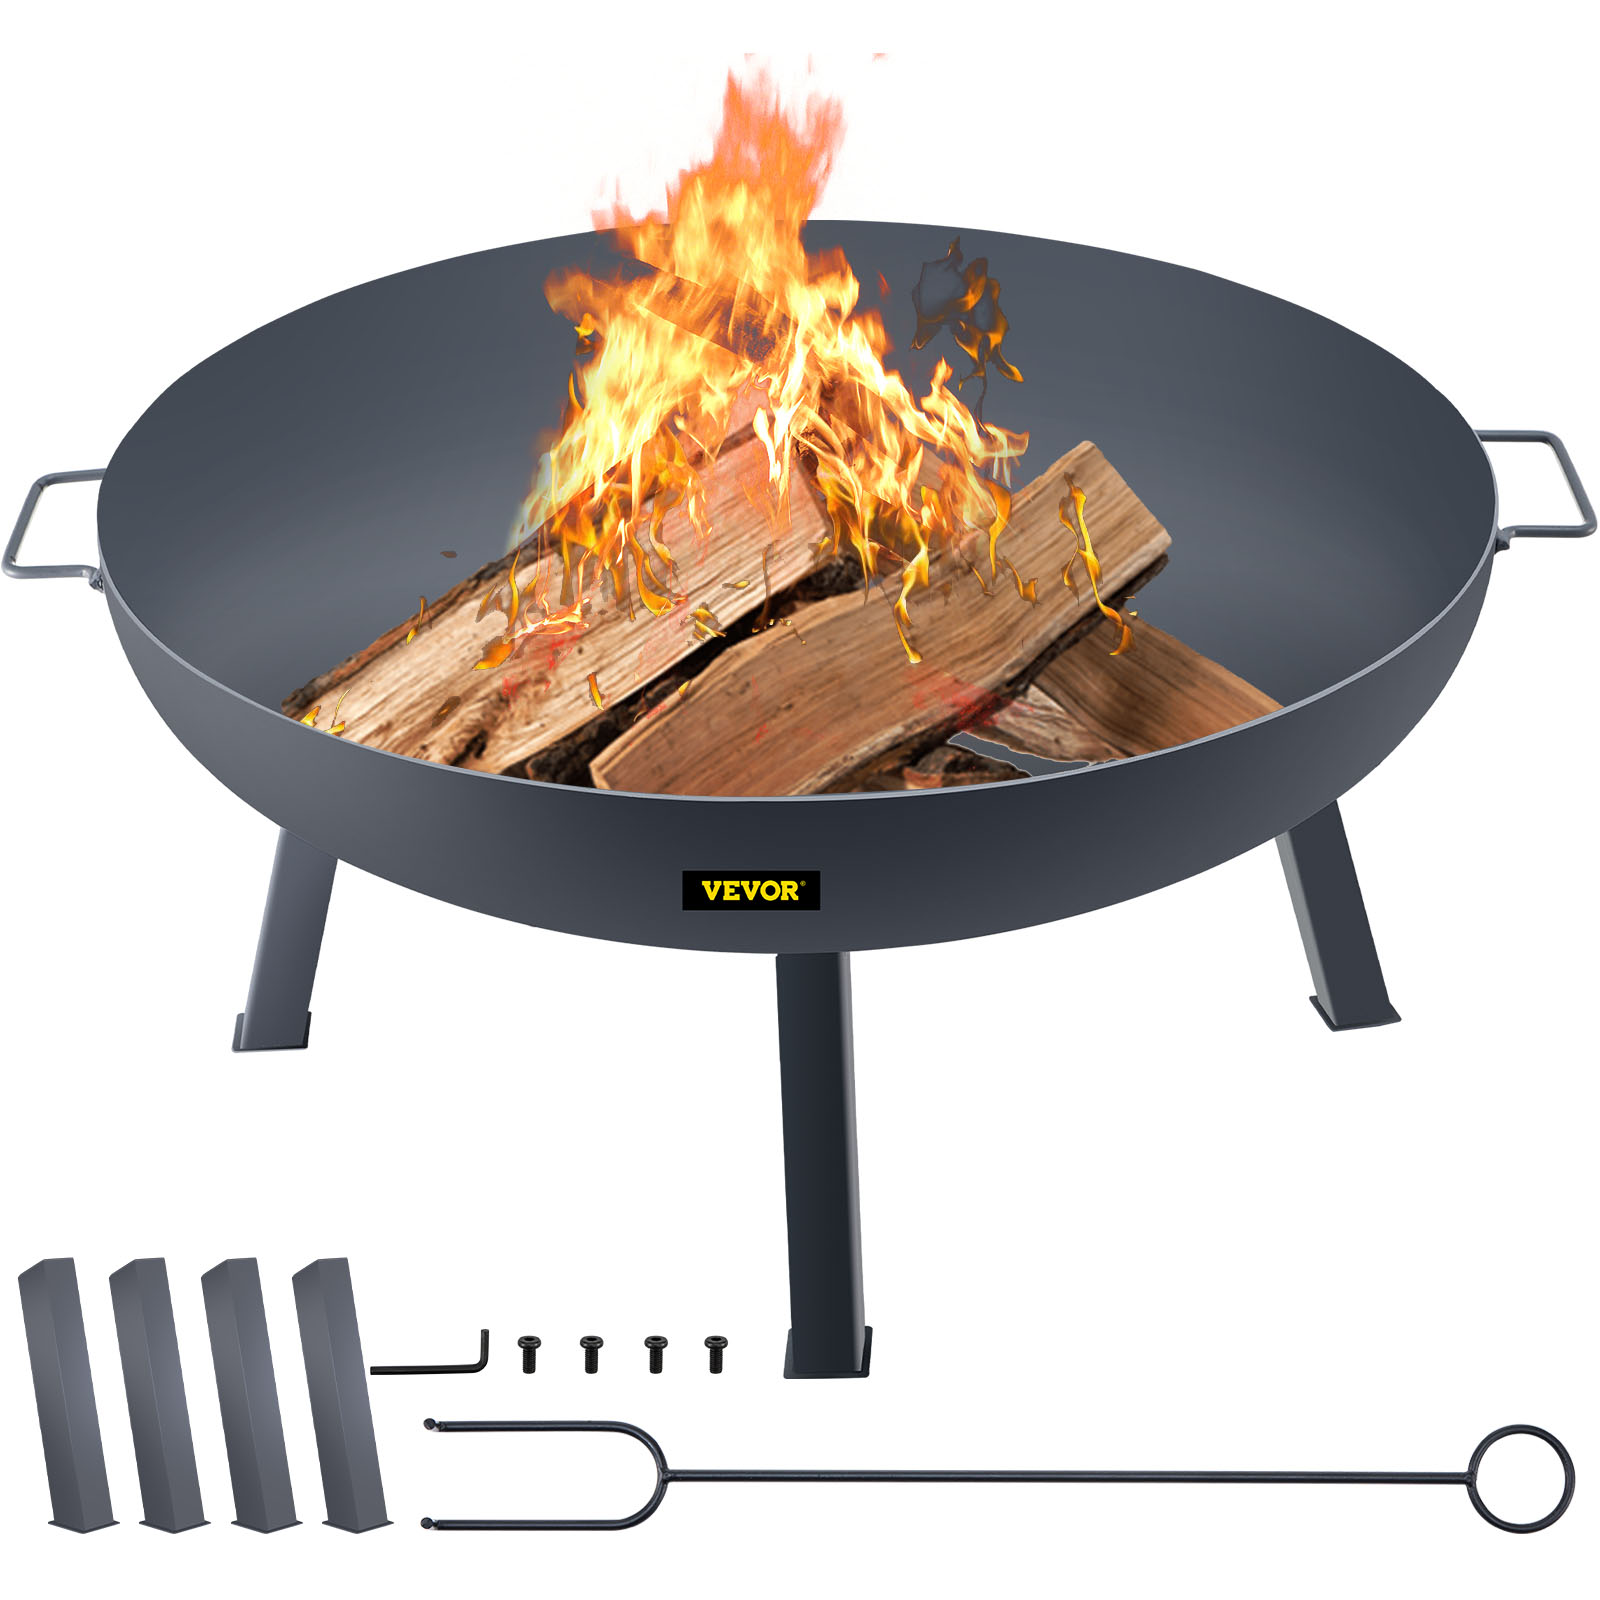 VEVOR Fire Pit Bowl Round Fire Pit 34-Inch Carbon Steel Outdoor Patio Portable от Vevor Many GEOs